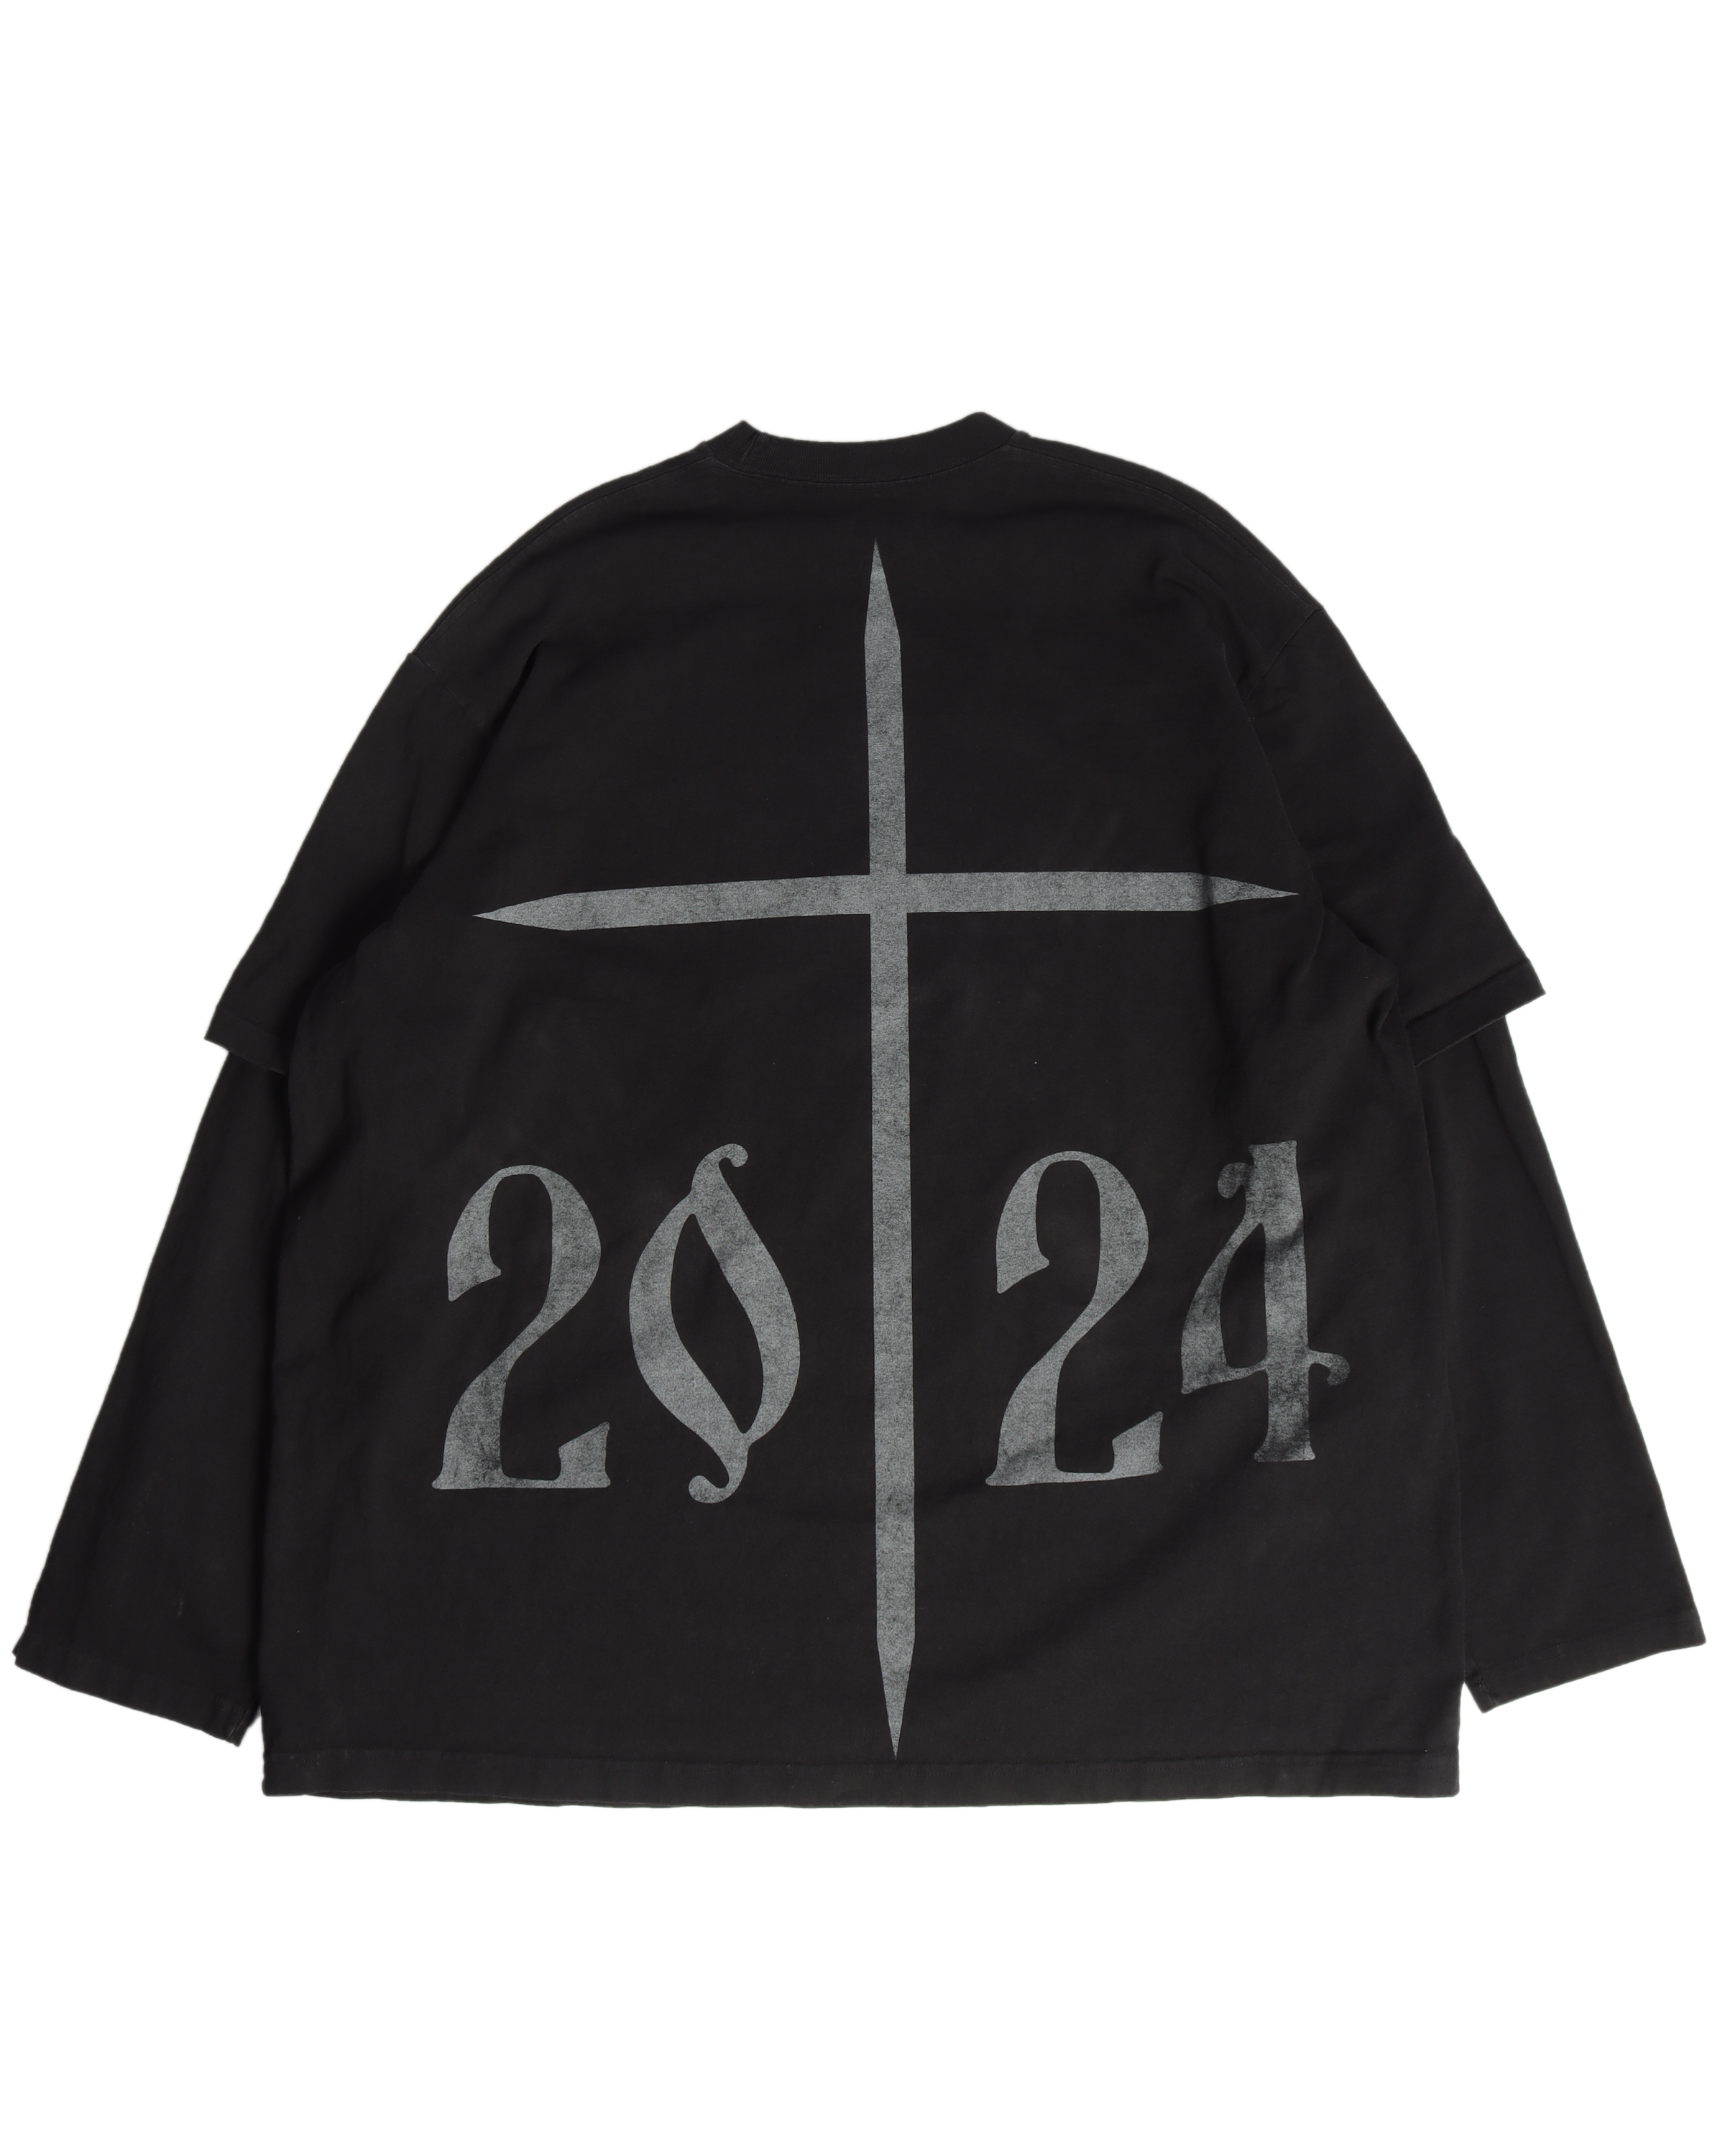 Donda Event "2024" Double Layered L/S T-Shirt